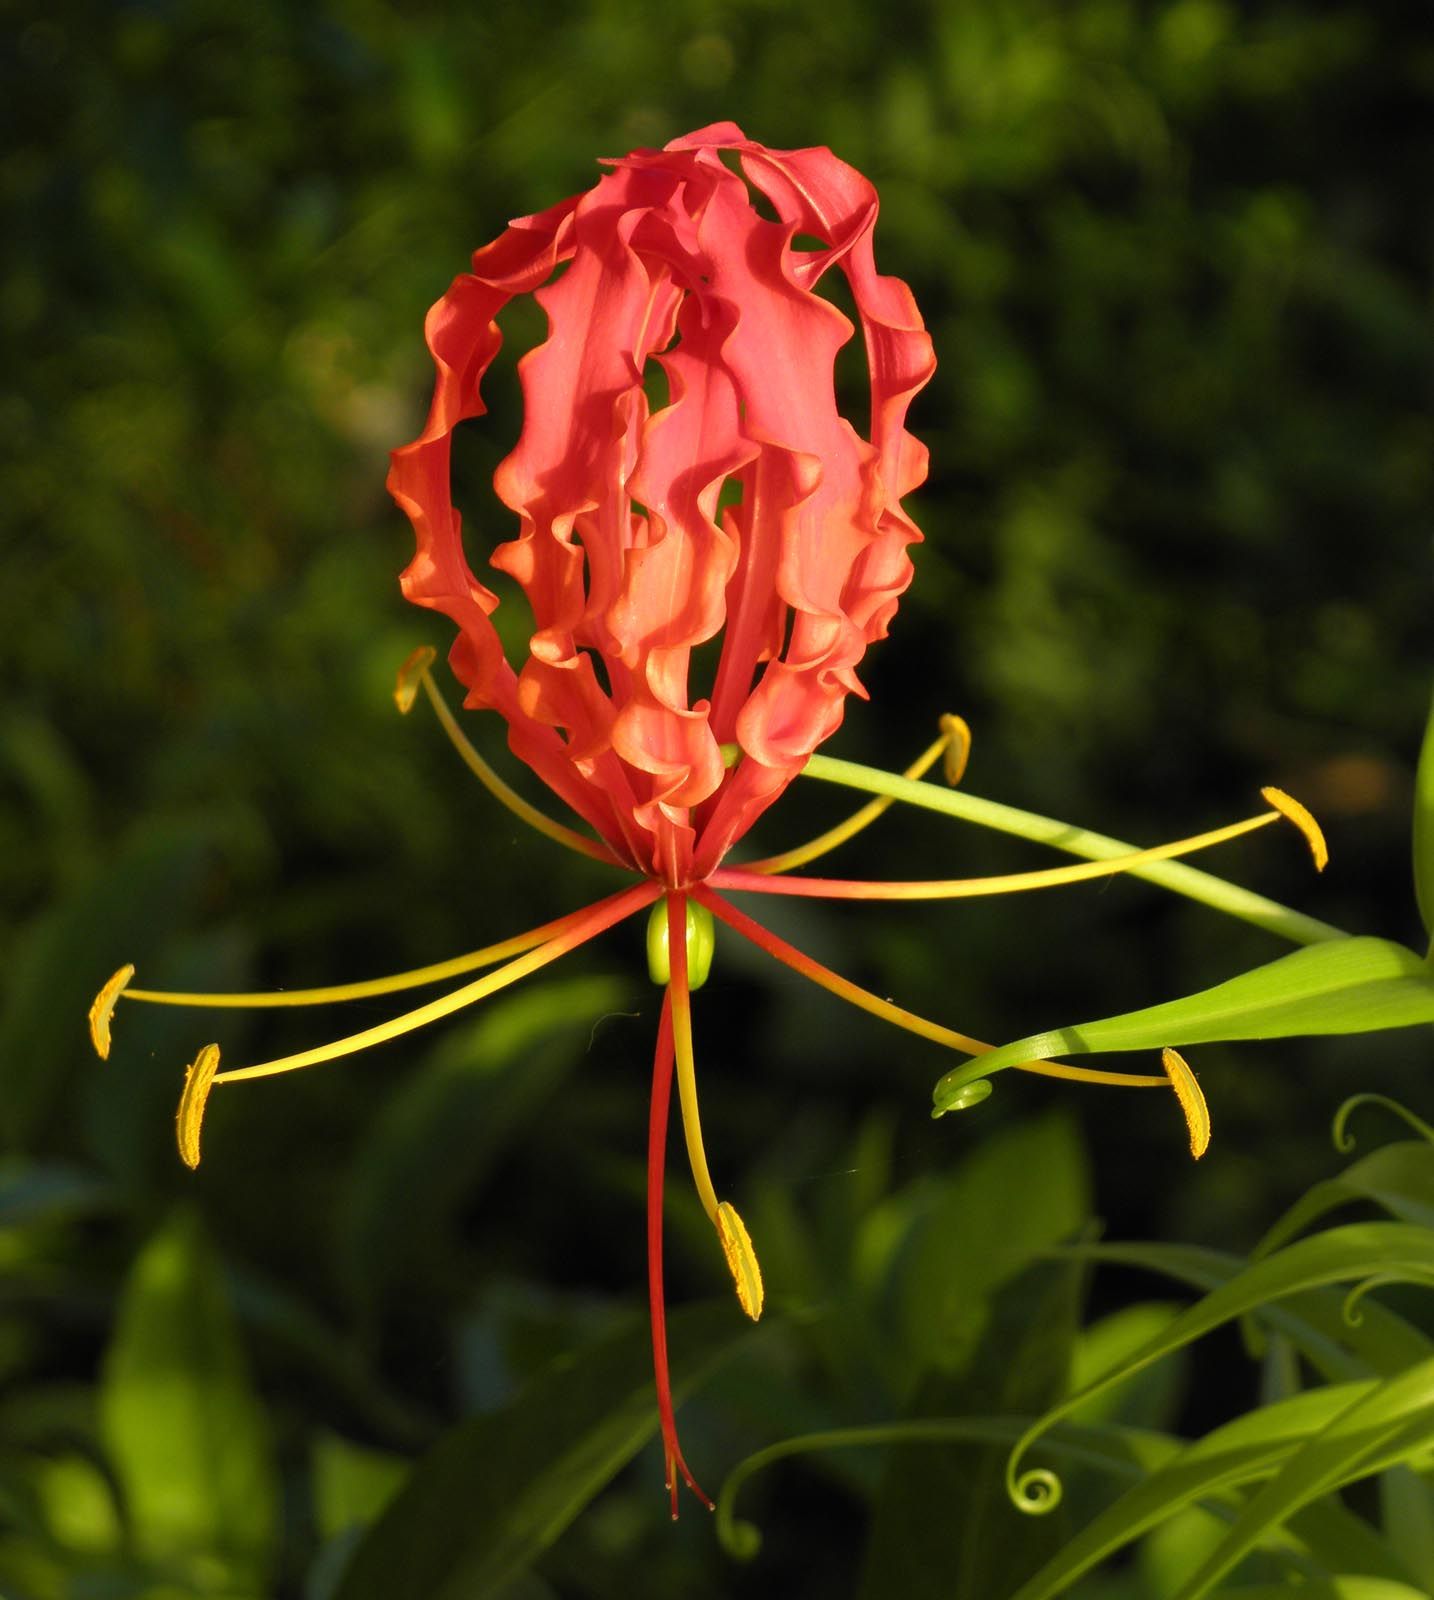 Strange upside-down flower at a more mature phase | For the love of ...